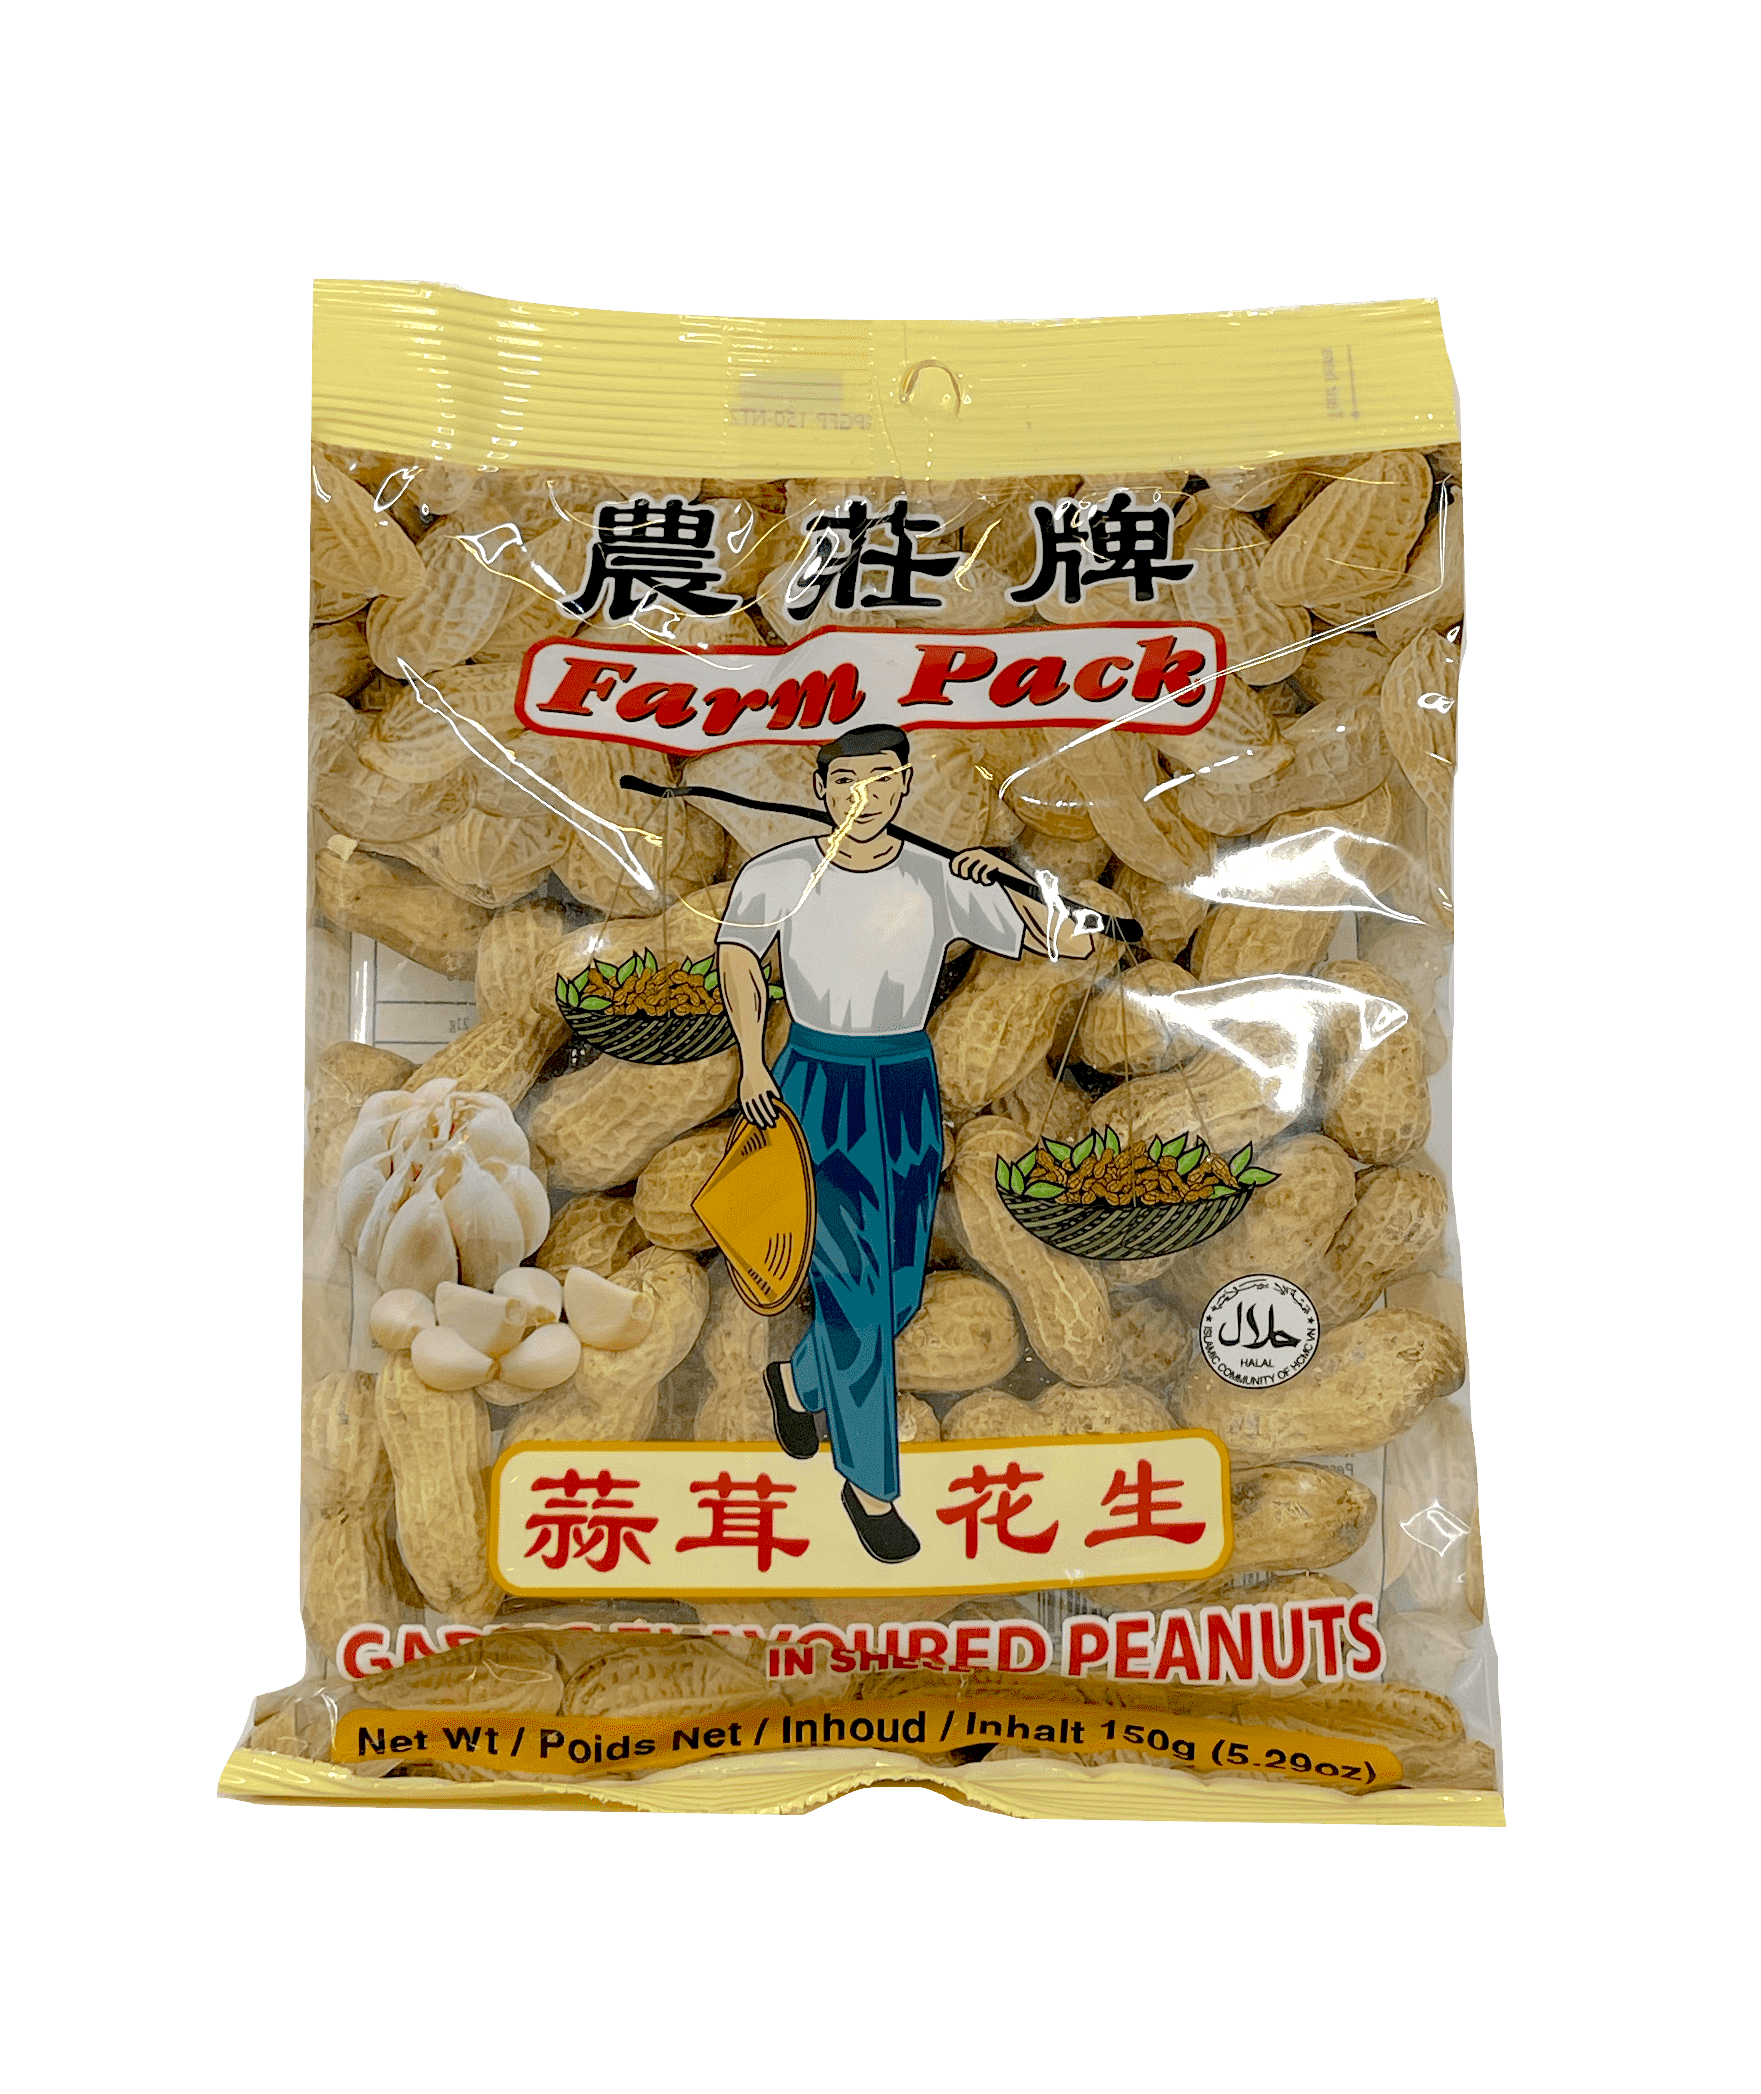 Roasted Peanuts With Garlic Flavor 150g Farm Pack China